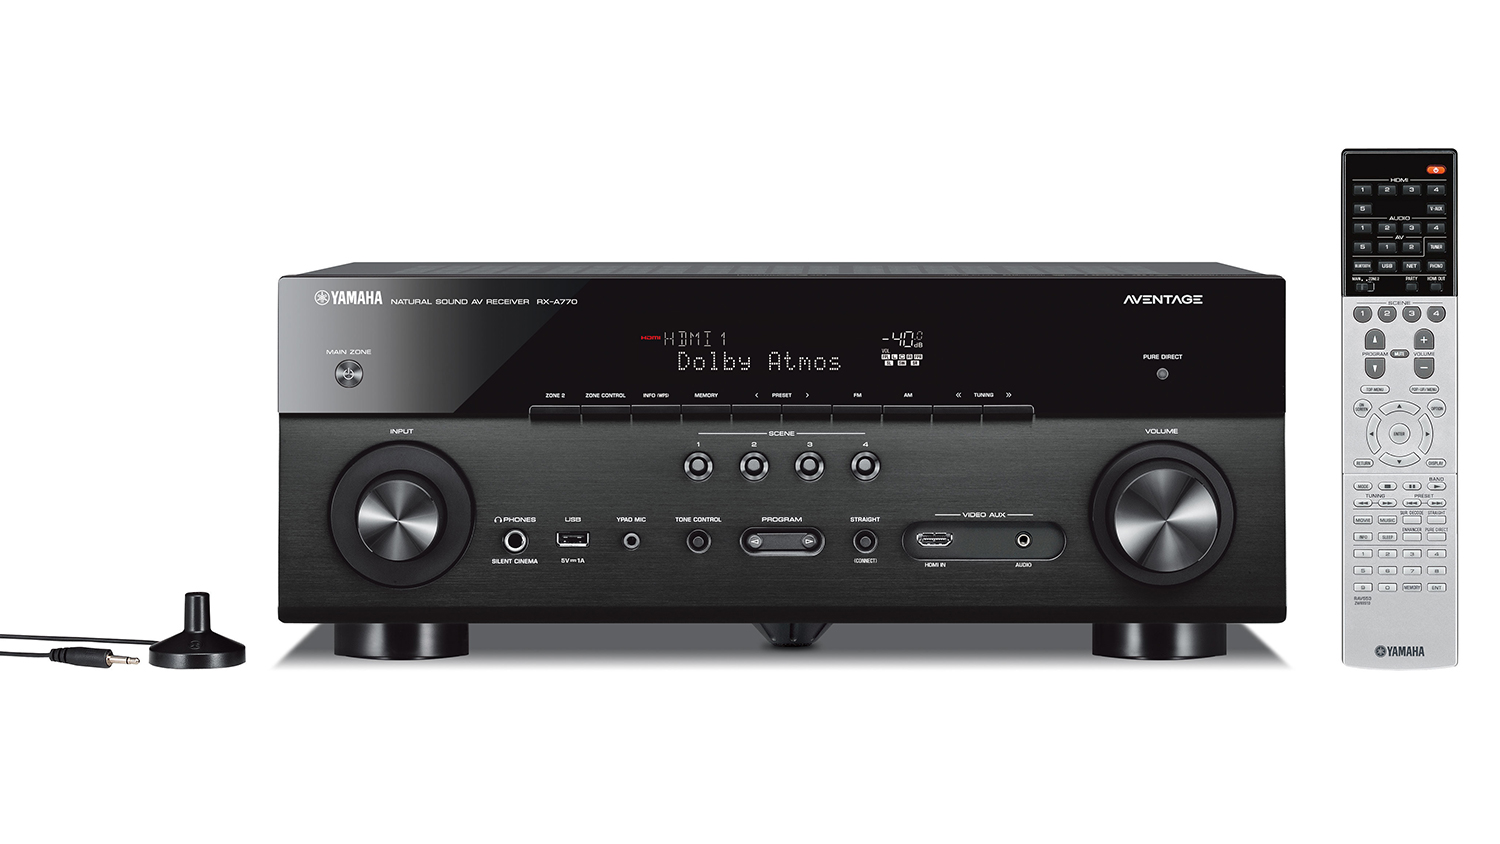 yamaha aventage rx a 70 series receivers 2017 pricing availability rxa770blfructr f